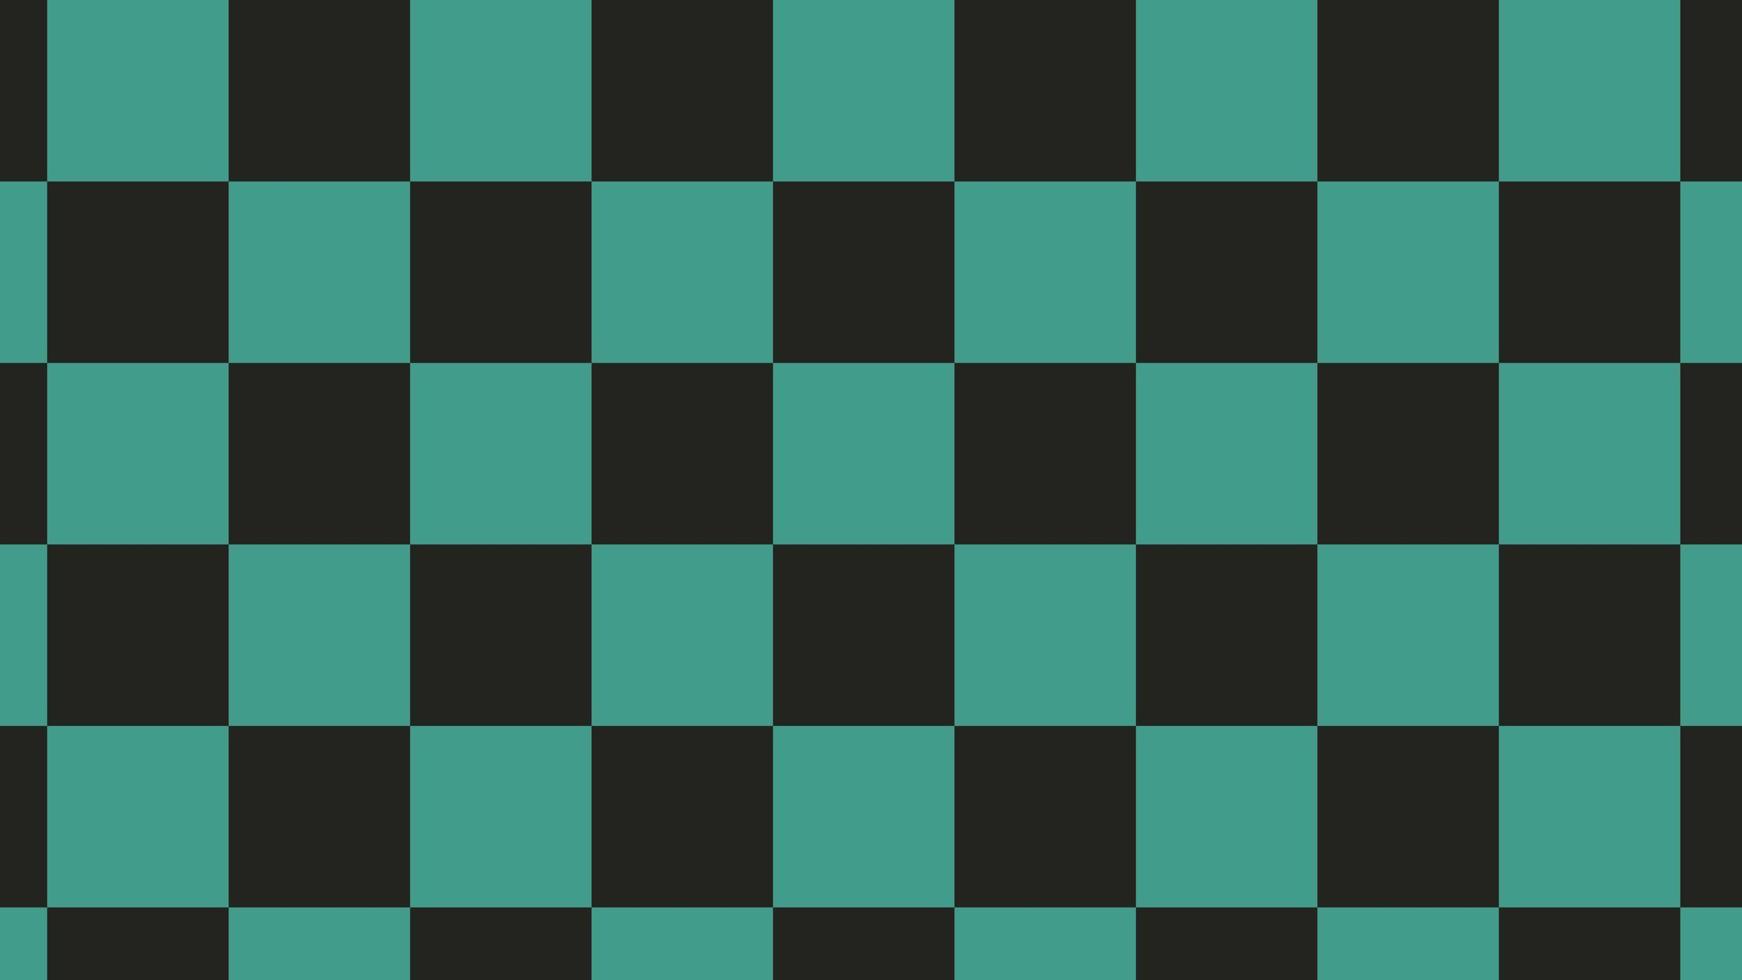 Black and Green Square Pattern Background. Design Perfect for Kimono, Print, Clothing, Fabric. vector